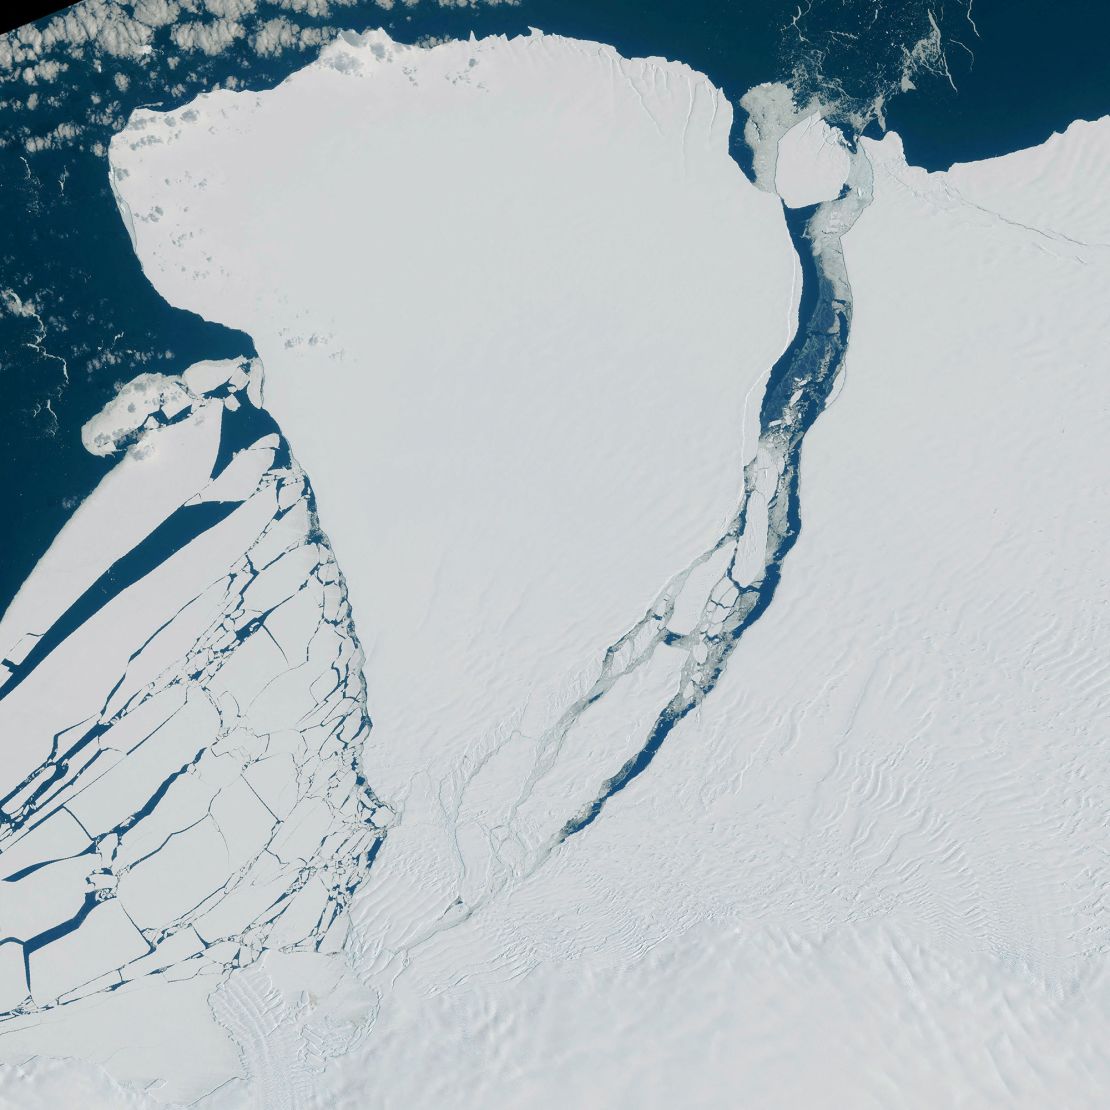 An aerial view of an iceberg, almost the size of Greater London, that has broken off the 150m thick Brunt Ice Shelf is pictured in Coats Land,  Antarctica, January 24, 2023. European Union/Copernicus Sentinel-2 Imagery/Processed by DG DEFIS/Handout via REUTERS  THIS IMAGE HAS BEEN SUPPLIED BY A THIRD PARTY. MANDATORY CREDIT. NO RESALES. NO ARCHIVES.